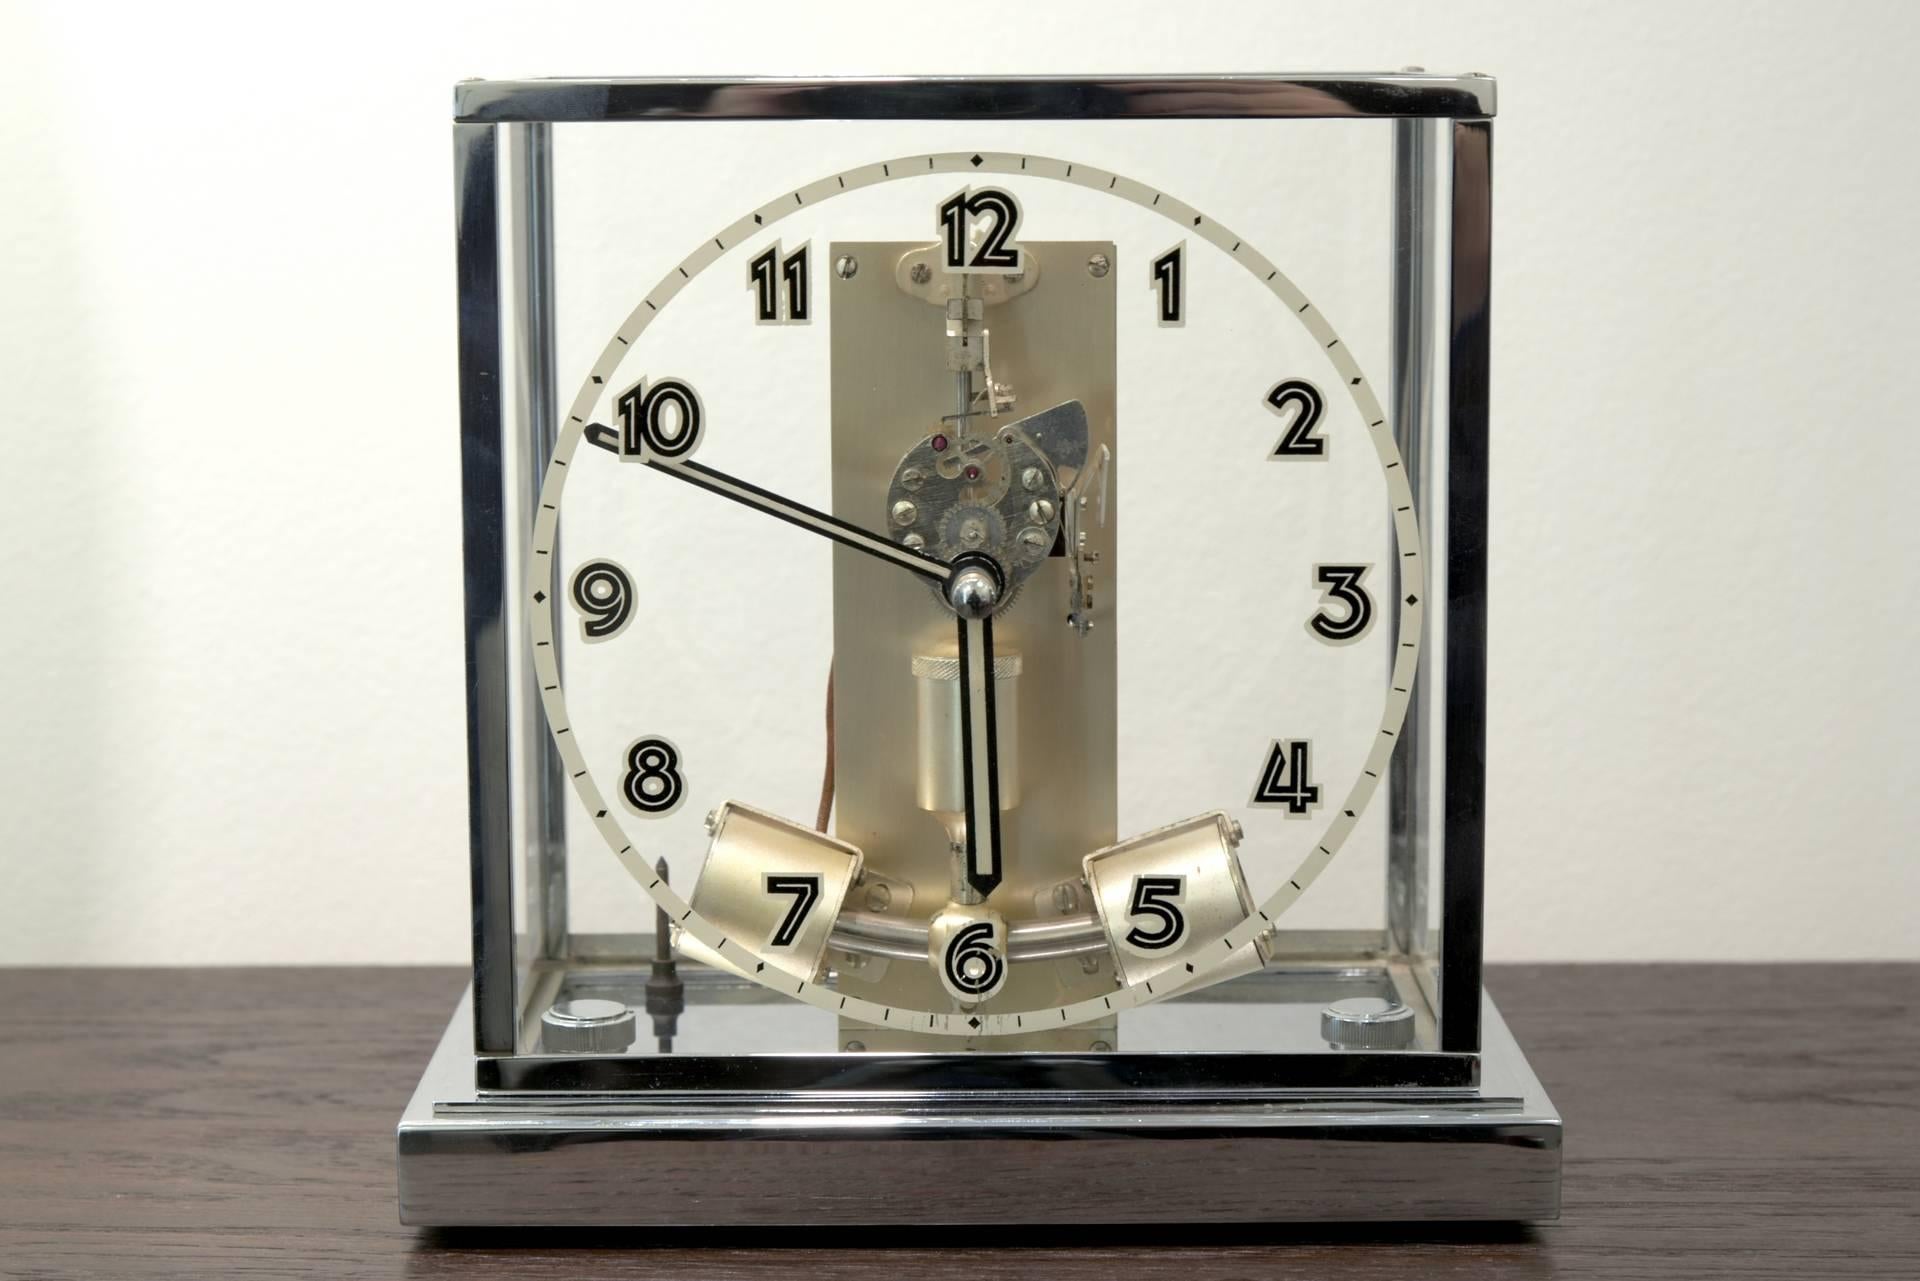 The ATO table clock by Junghans from the Black Forest presents itself in good condition. In the late 1920s, Junghans acquired the patents of Leon Hatot, Paris, for the construction of electromagnetic-powered watches. Good quality, reliable!
With